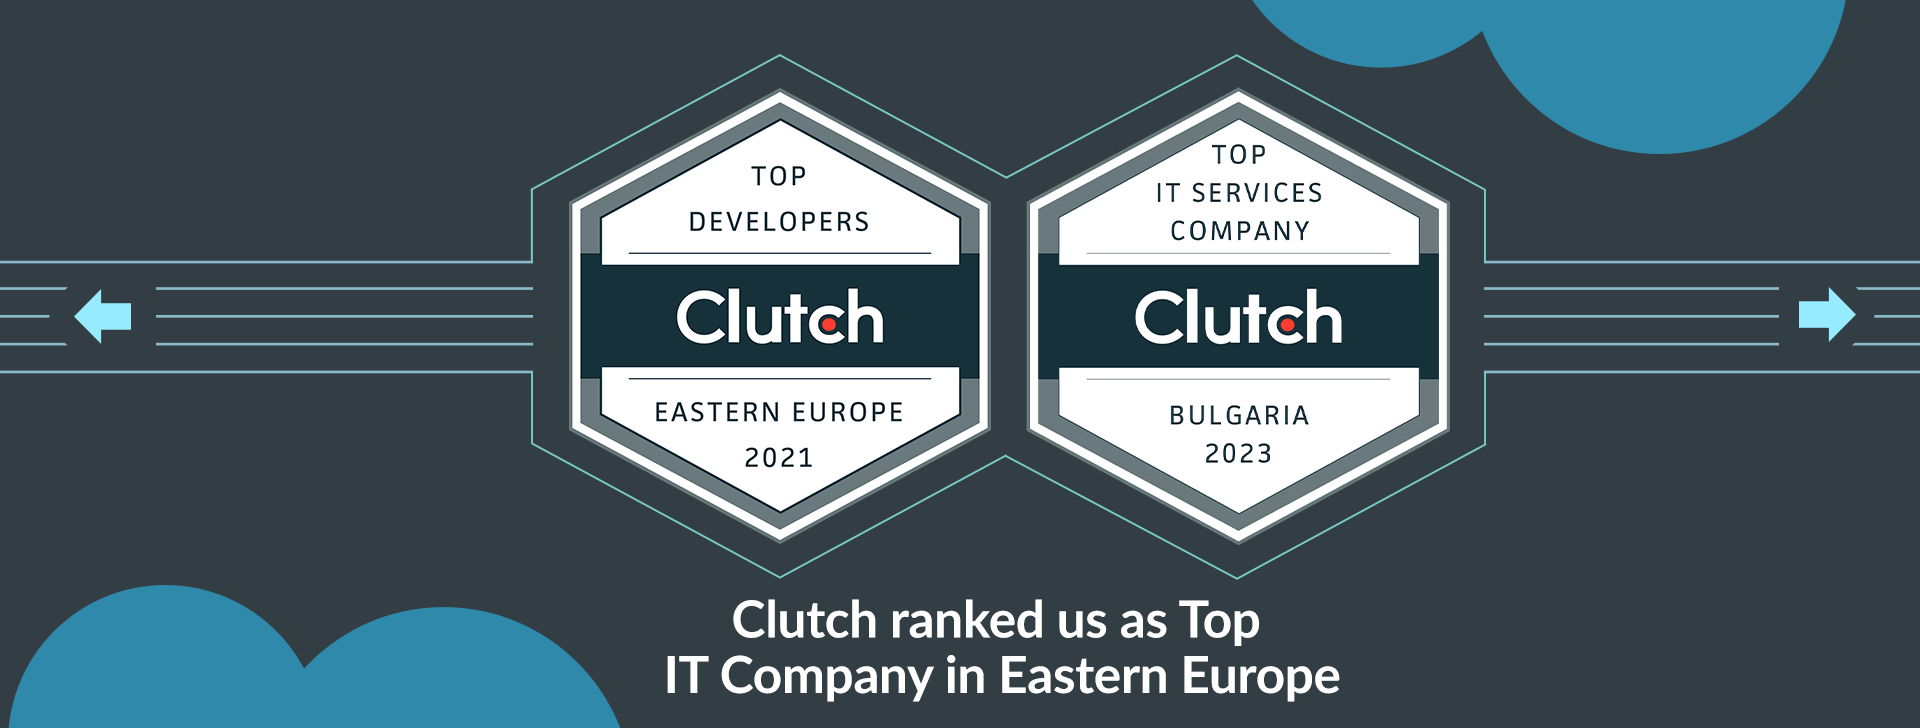 Clutch ranked us as Top IT Company in Eastern Europe